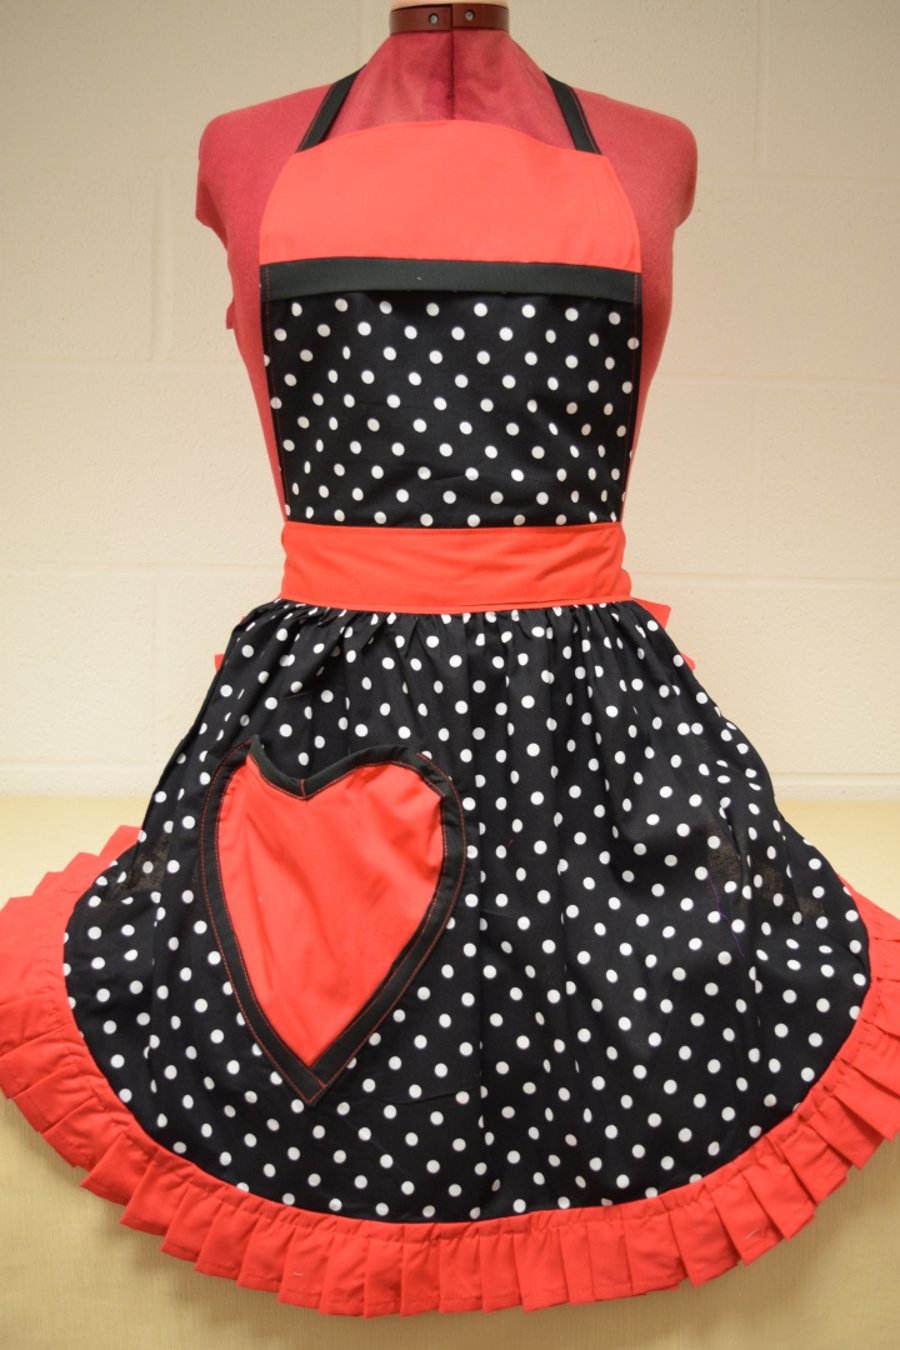 Vintage 50s Style Full Apron - Valentines Black & White Polka Dot with Red Trim